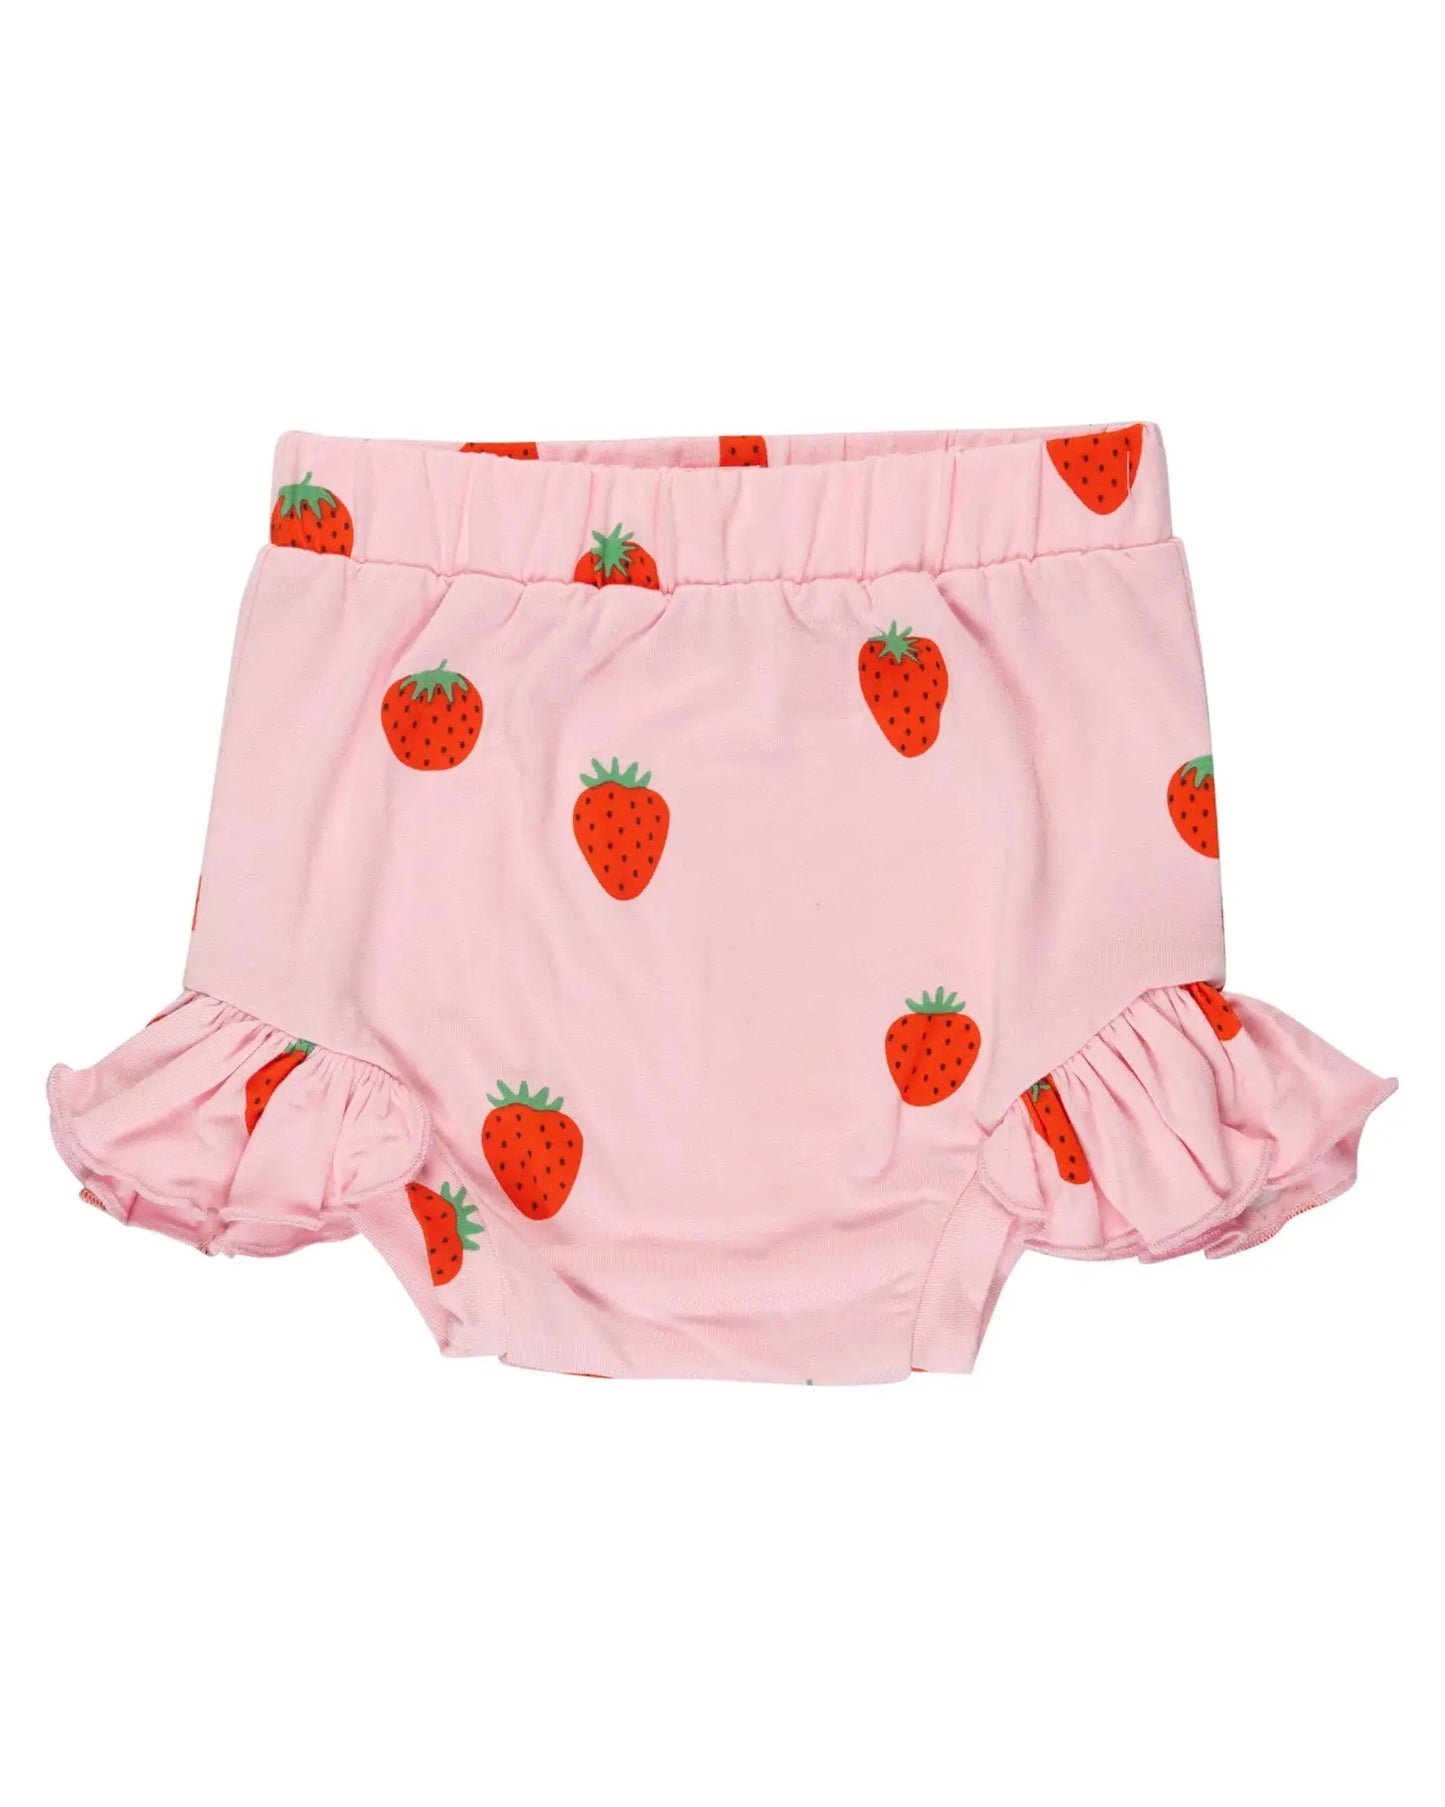 Dada Strawberry Bloomers (Baby/Toddlers)